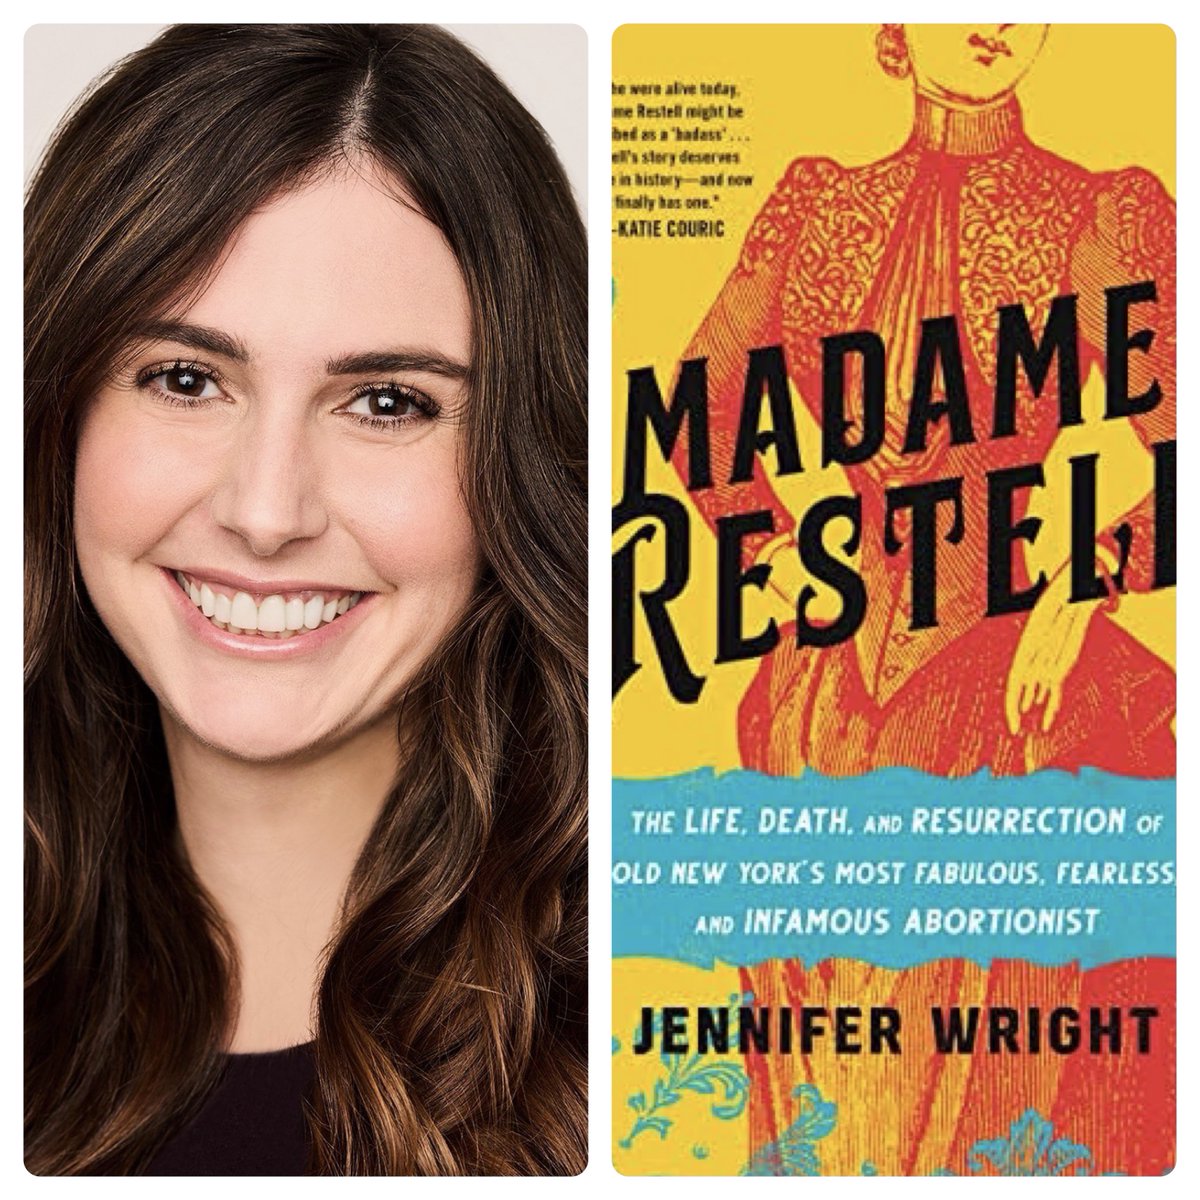 “You cannot stop abortion; it is a fact of life in any historical period.” - Writer @JenAshleyWright on @TalkNerdy_Pod. 📔: 'Madame Restell: The Life, Death, and Resurrection of Old New York’s Most Fabulous, Fearless, and Infamous Abortionist.' 🎧: patreon.com/posts/82315598